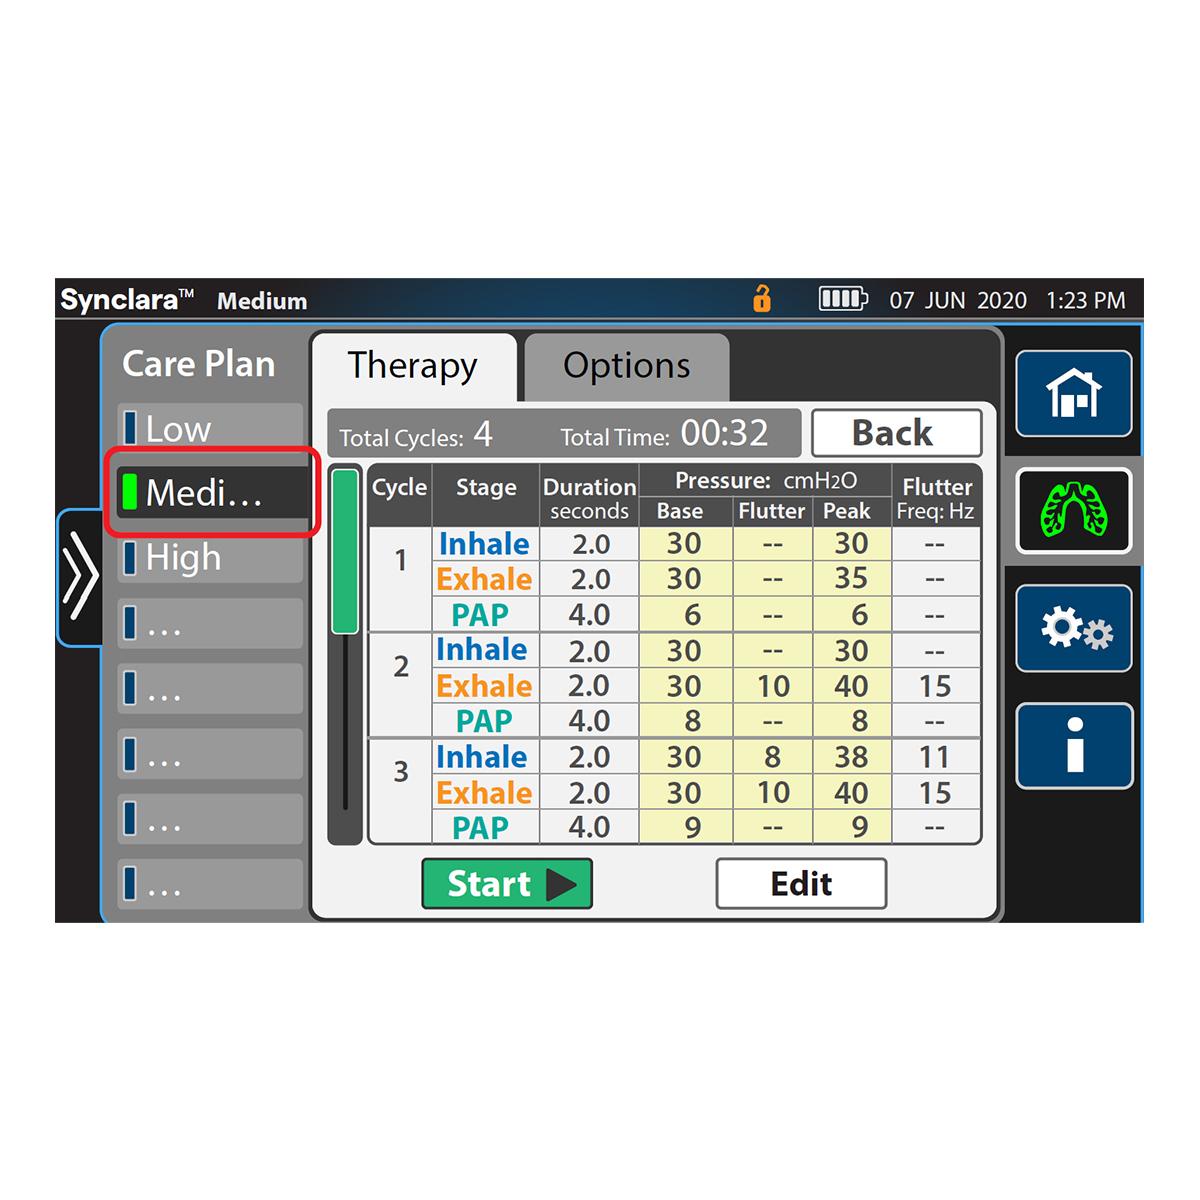 Synclara therapy selection screen.